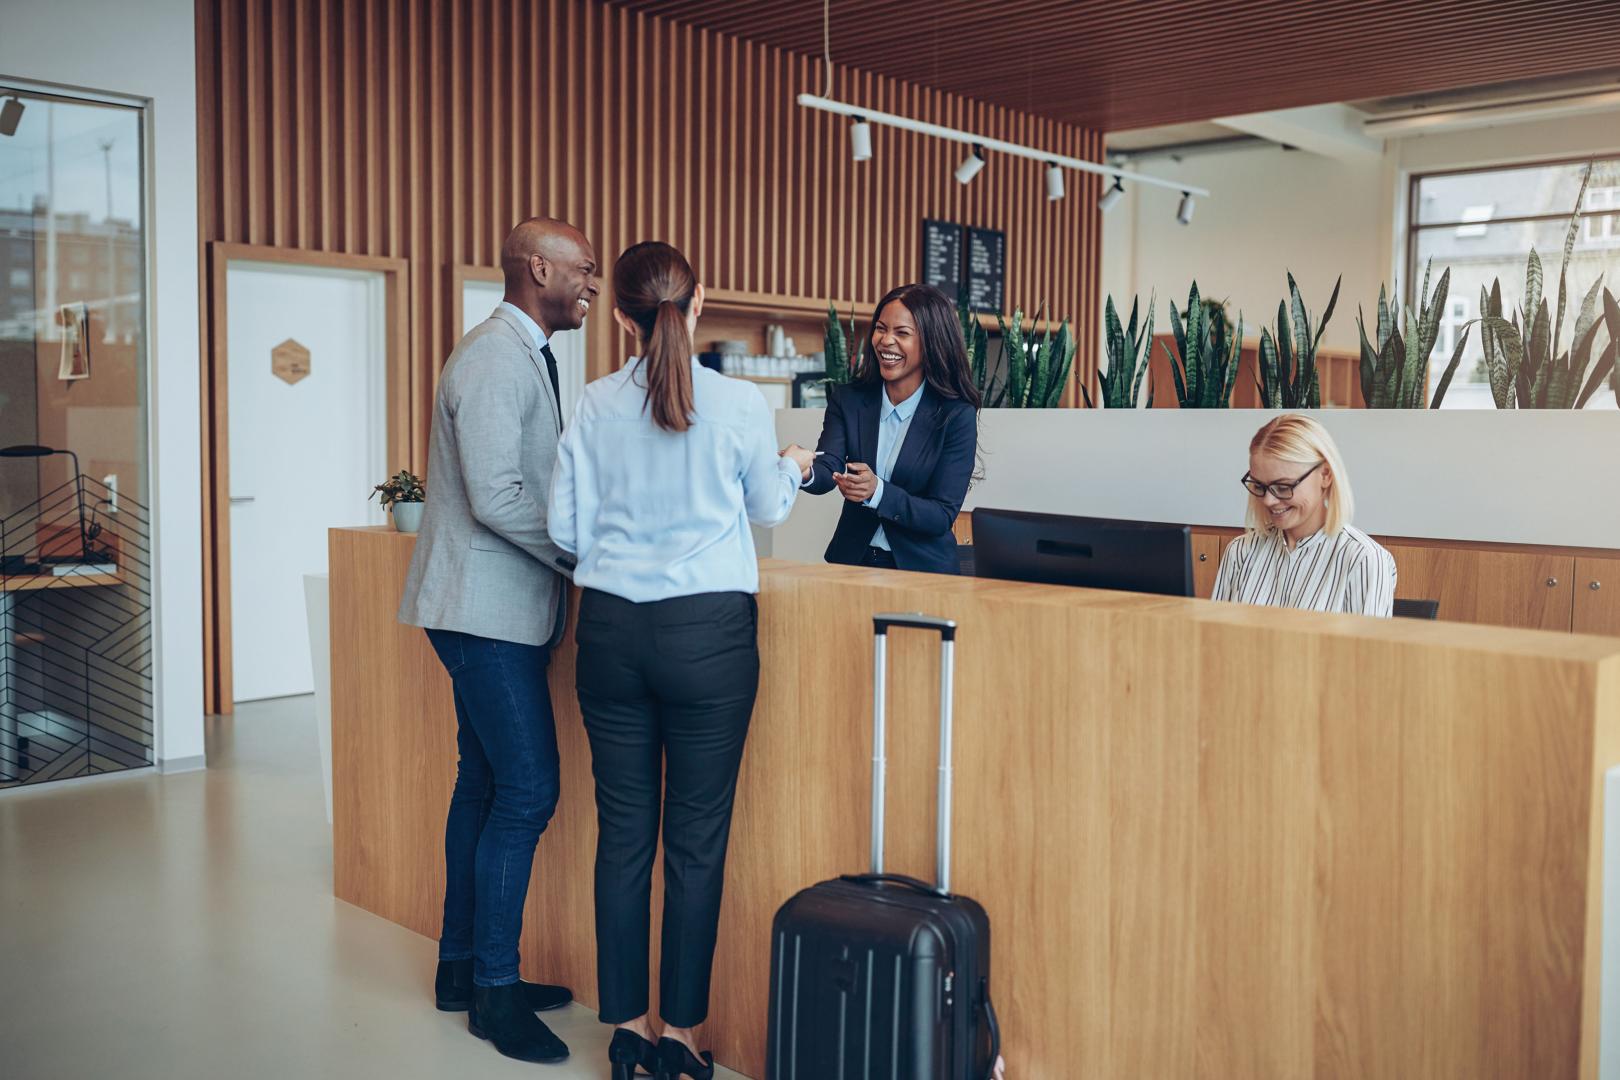 Business colleagues at a modern hotel reception desk, with a receptionist smiling.